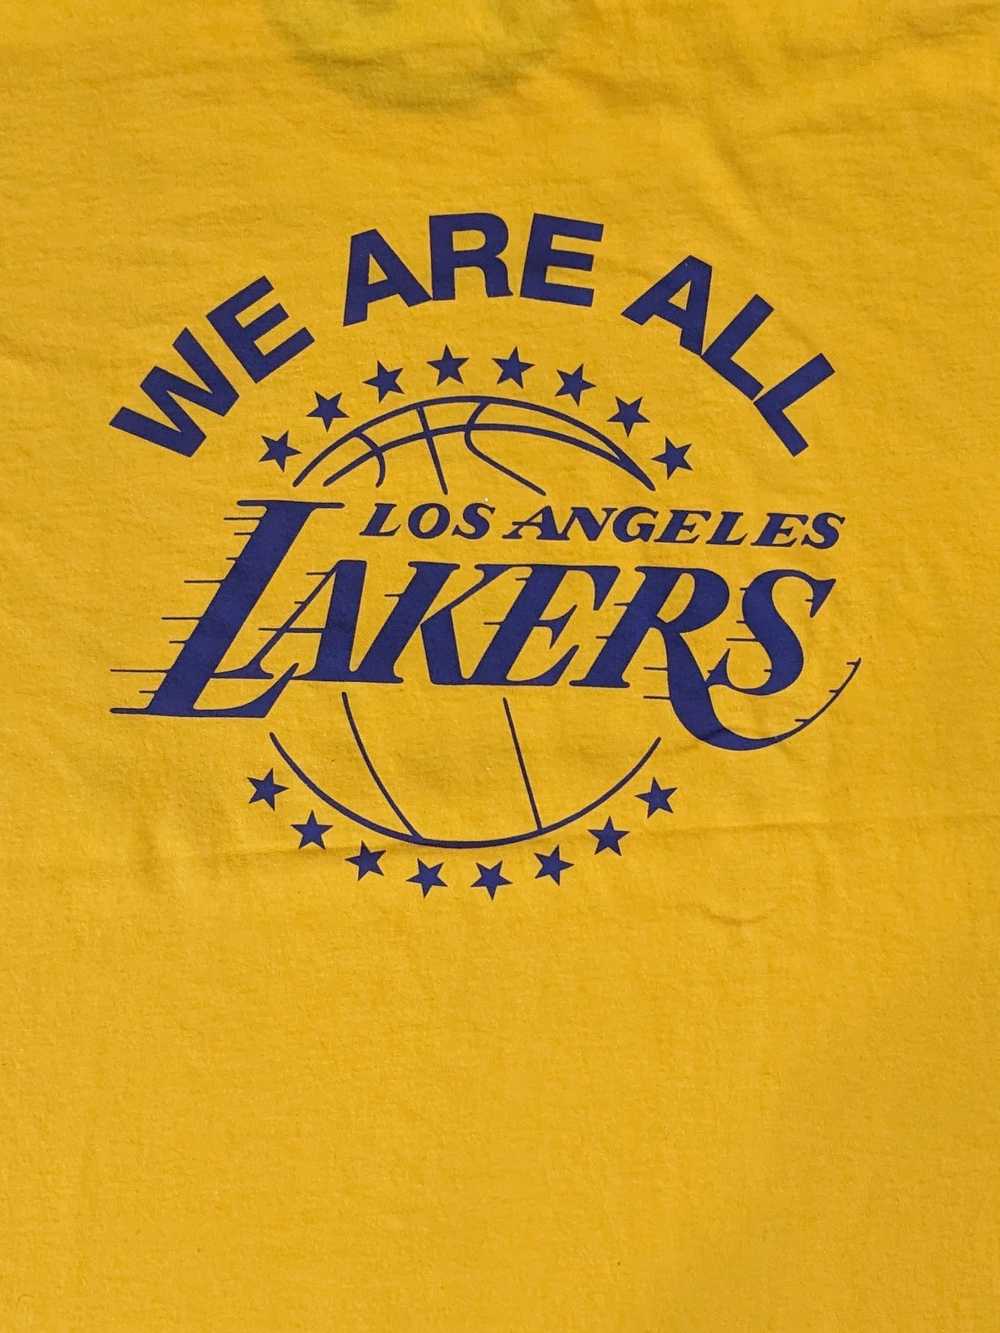 L.A. Lakers × Lakers × NBA I Am a Laker - We Are … - image 5